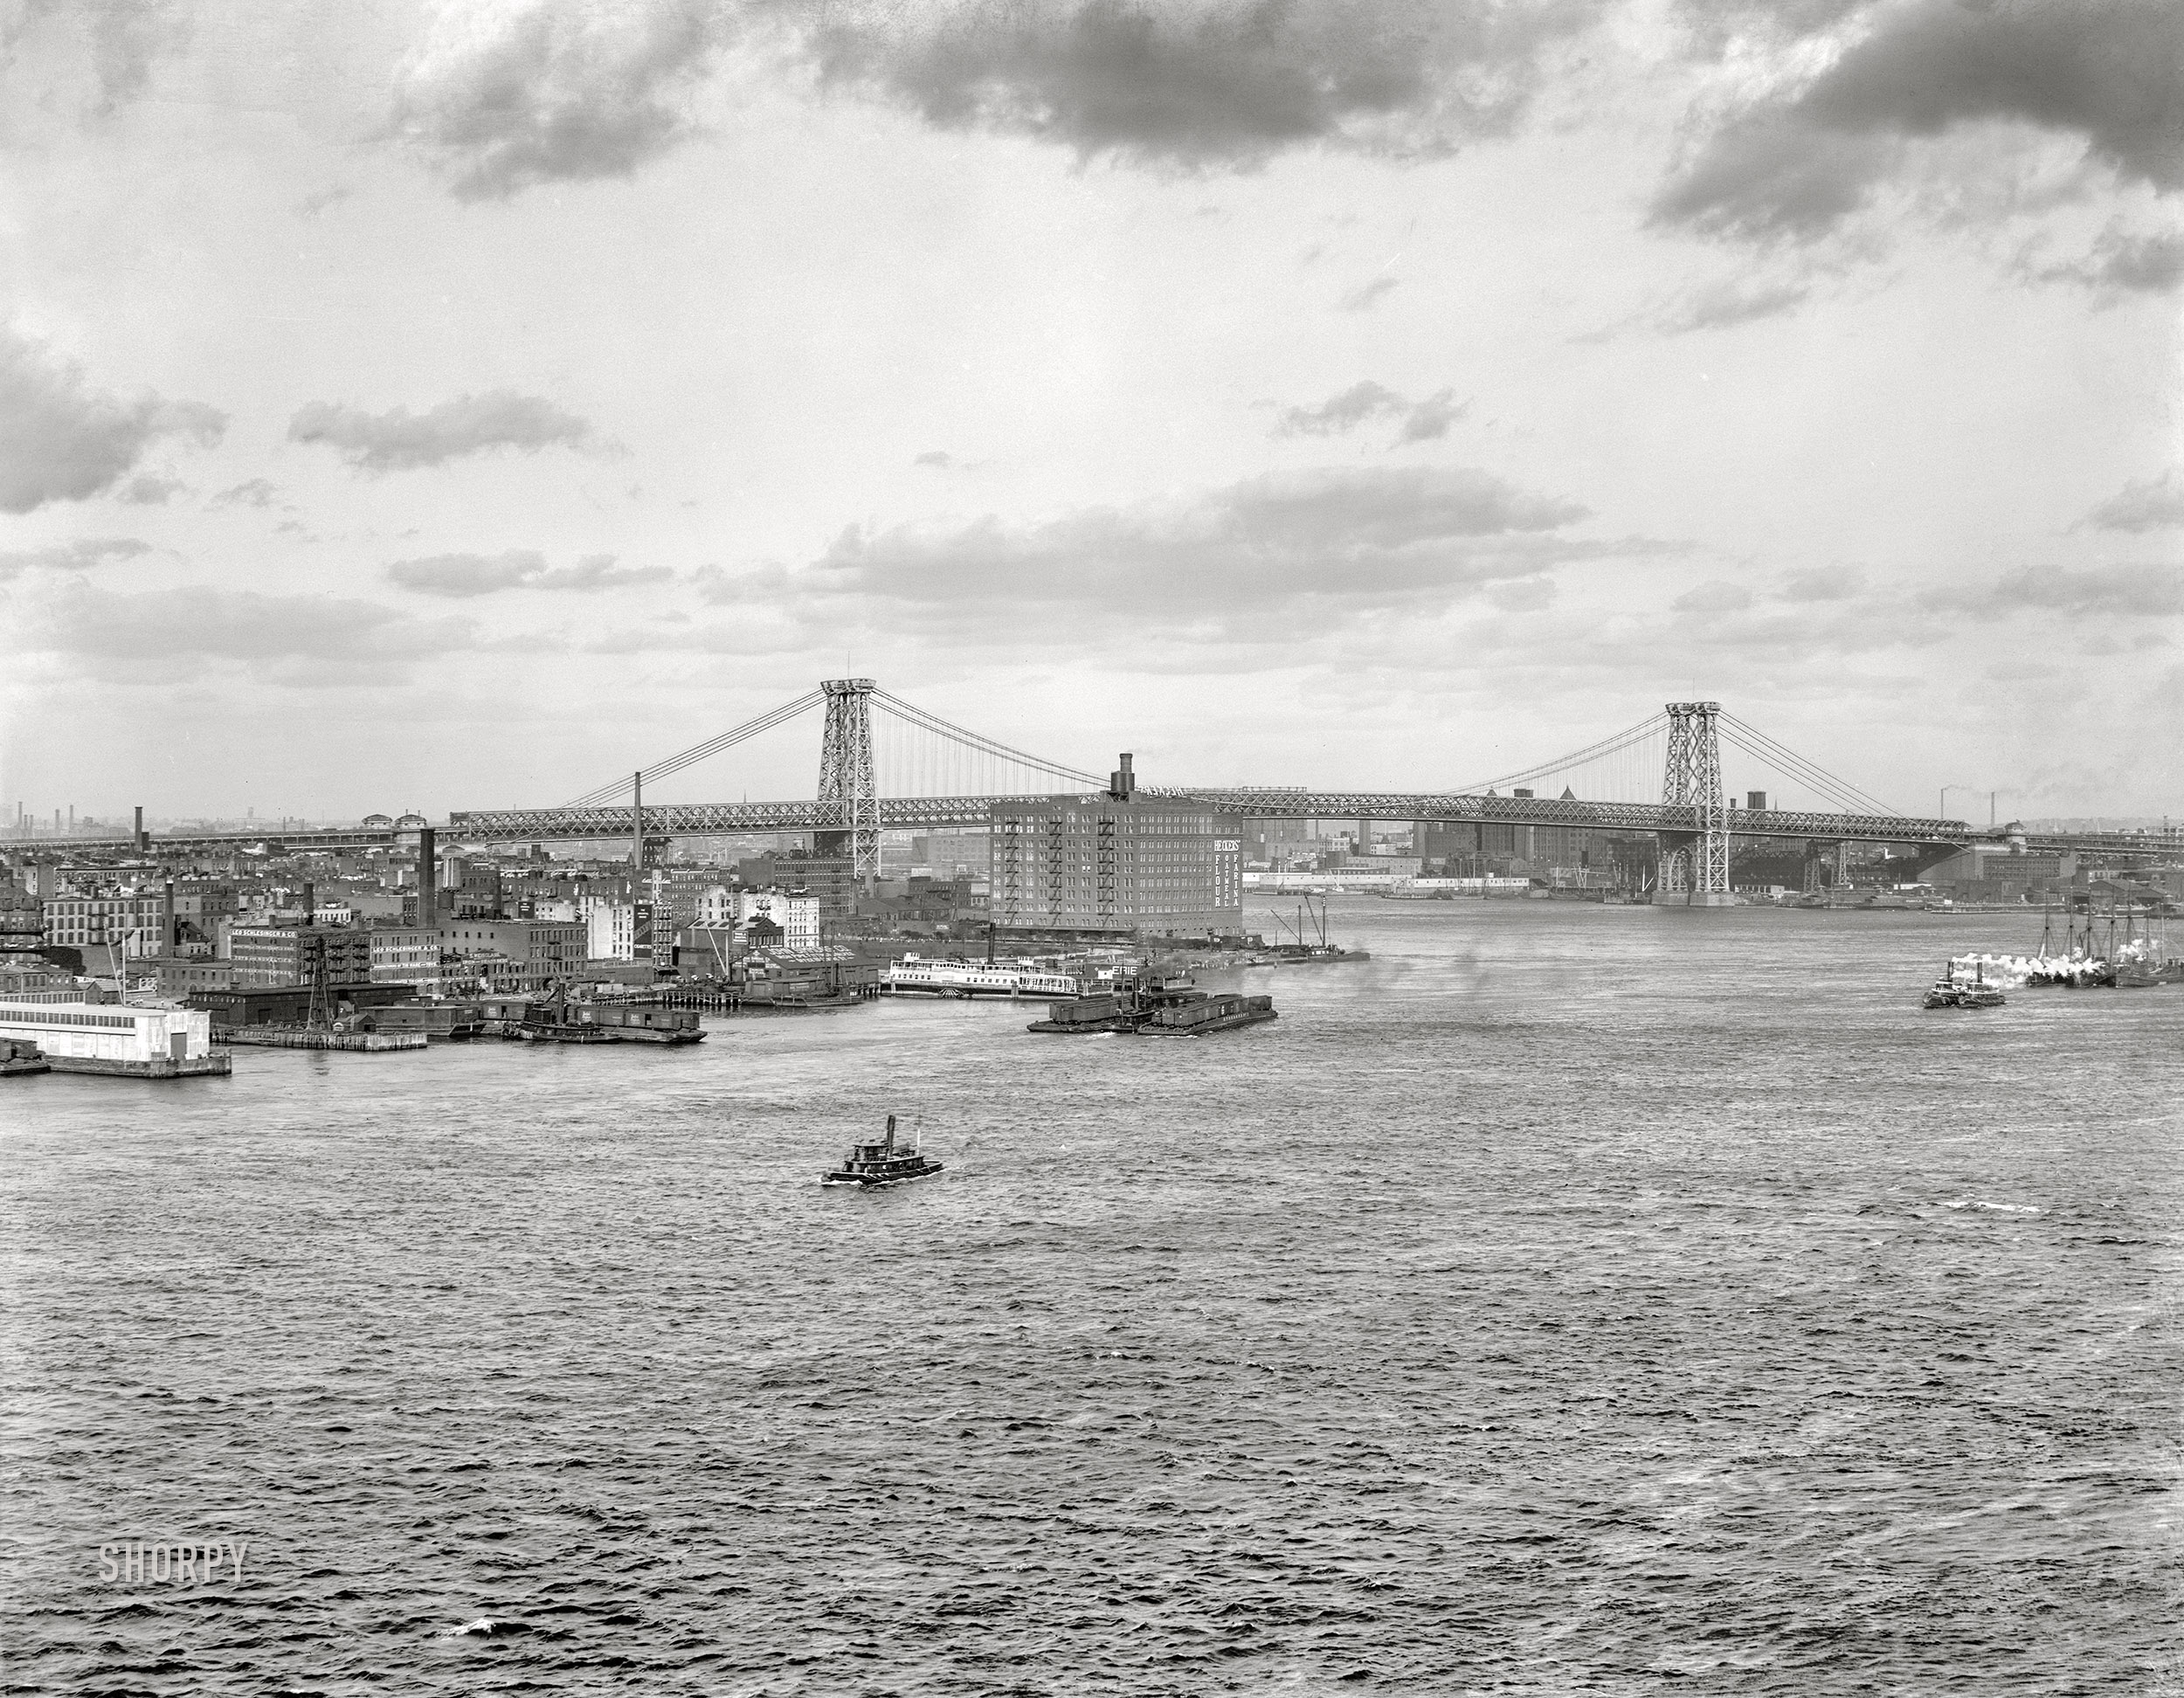 New York circa 1910. "Williamsburg Bridge and East River waterfront." With a cameo by the Heckers' Flour mill on Water Street. 8x10 glass negative, Detroit Publishing Co. View full size.